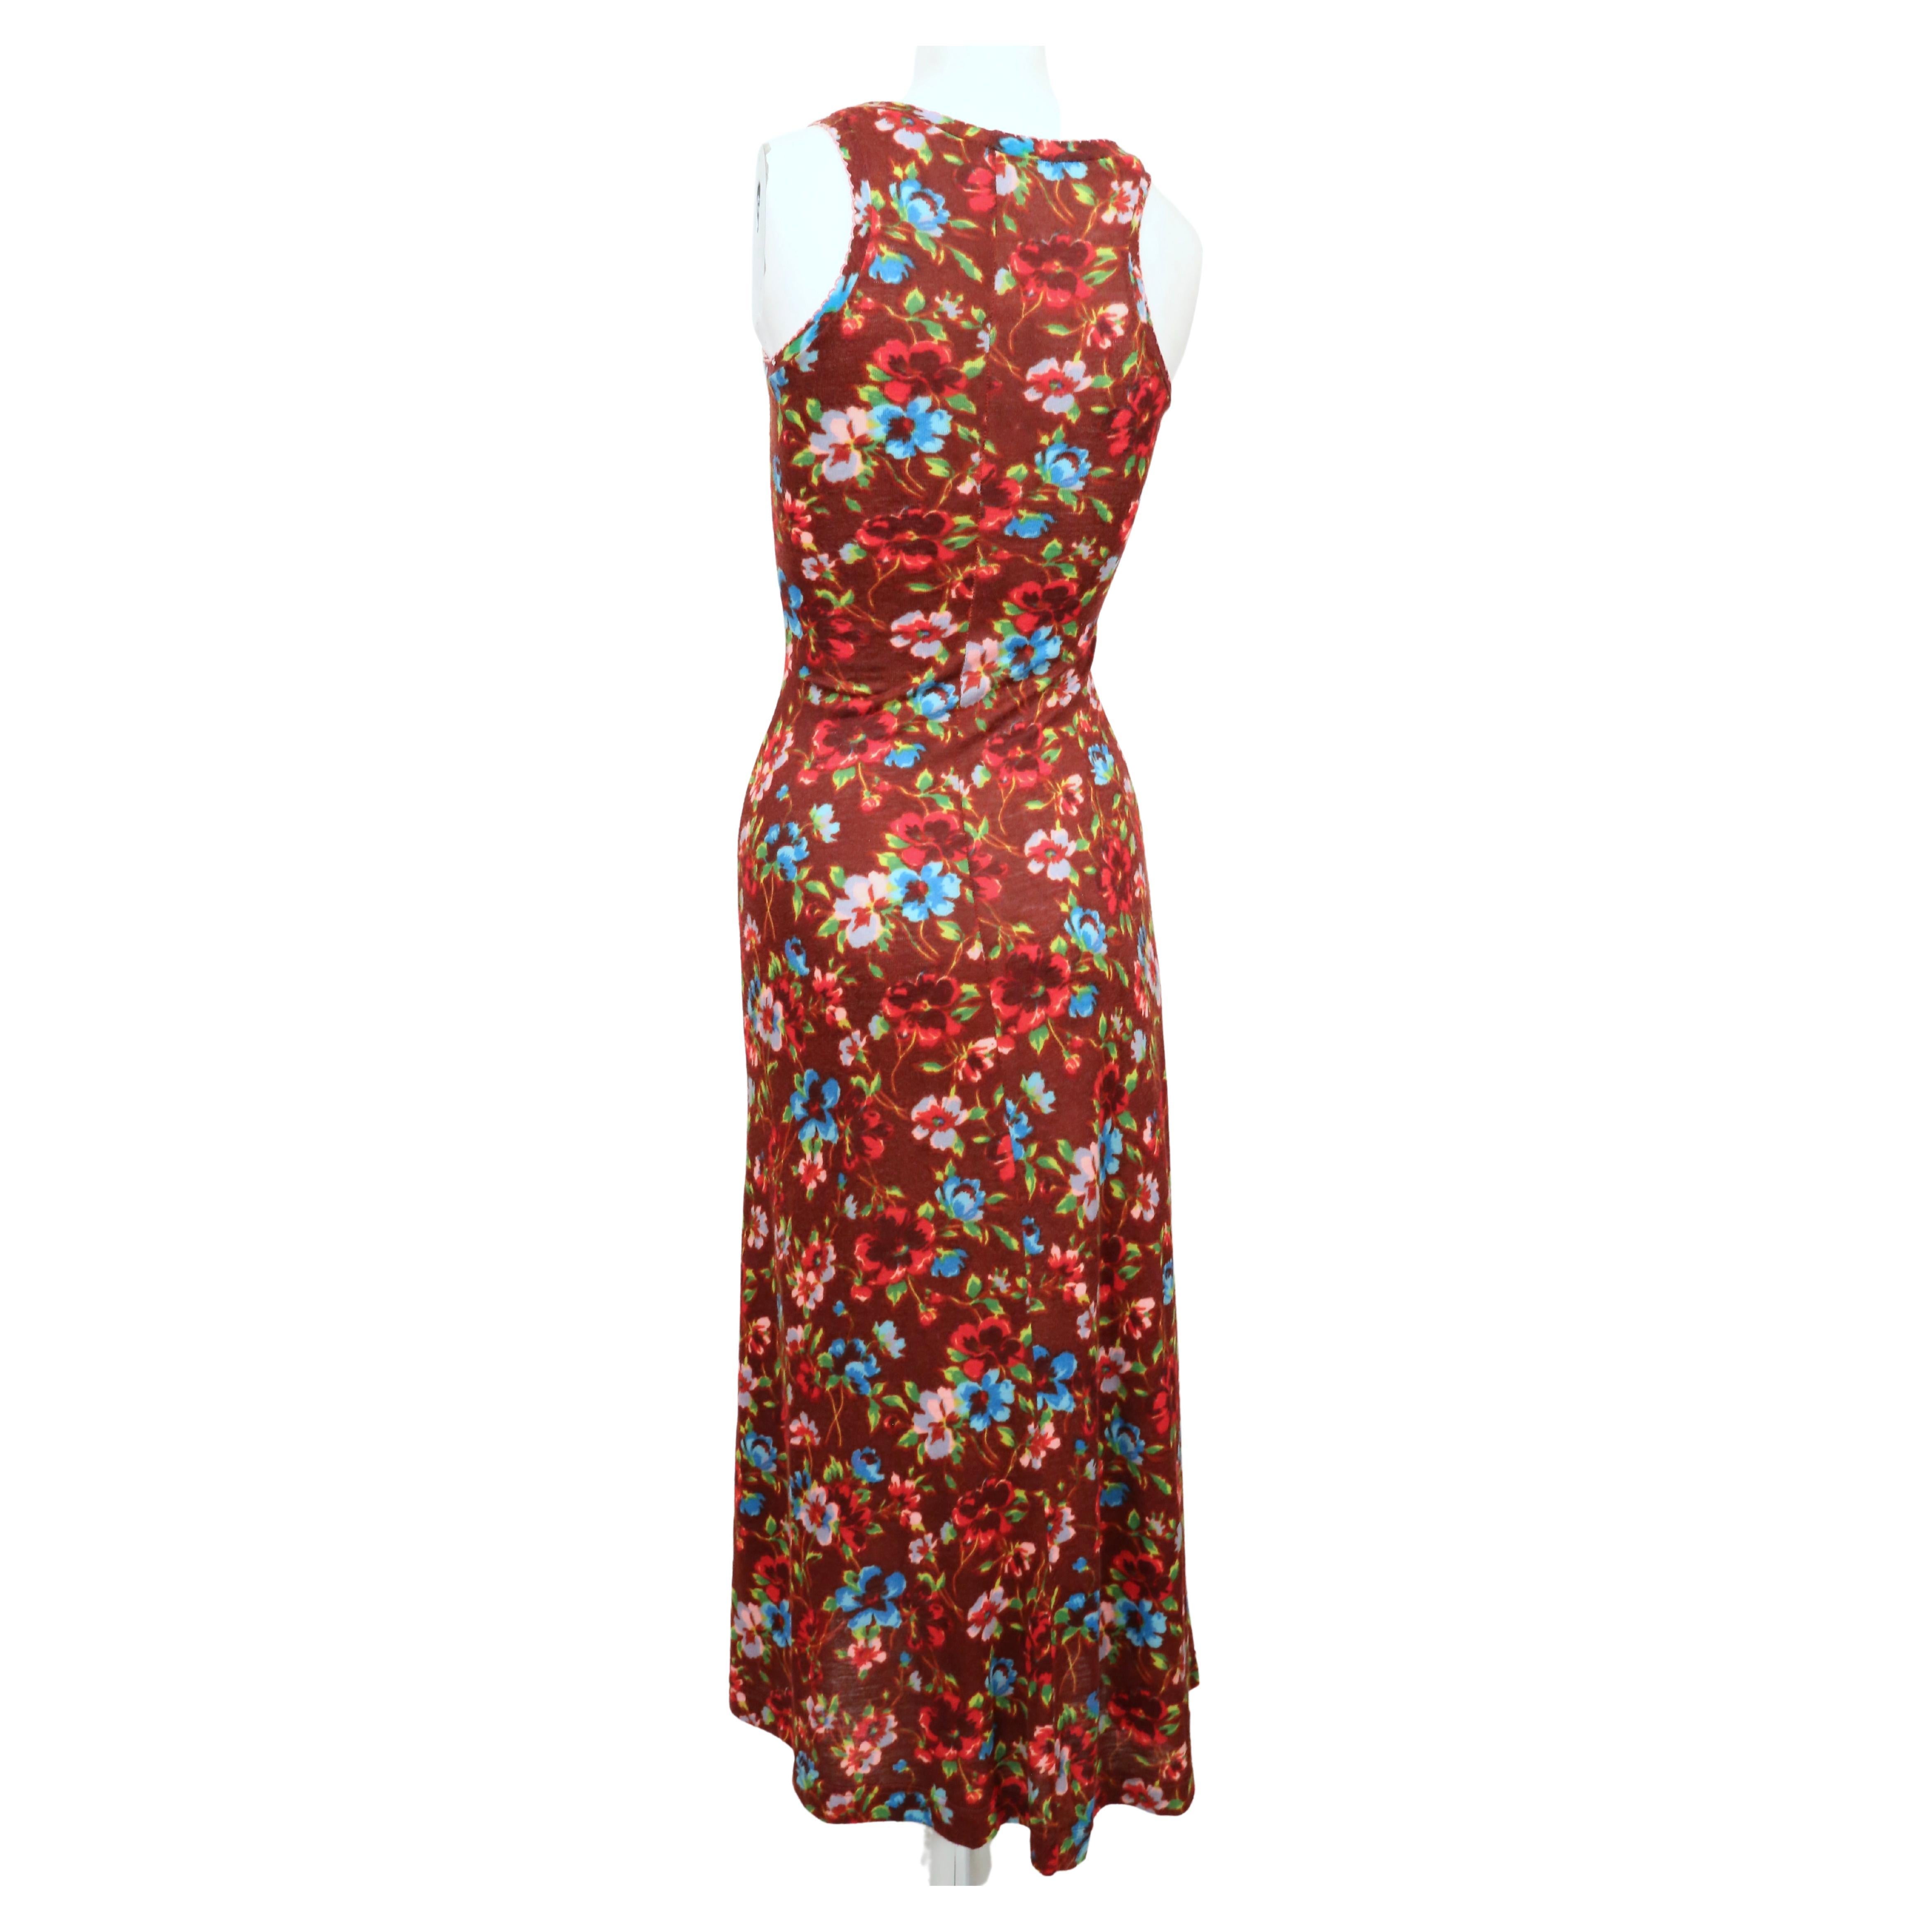 1970's ALLEY CAT by BETSEY JOHNSON floral dress 1